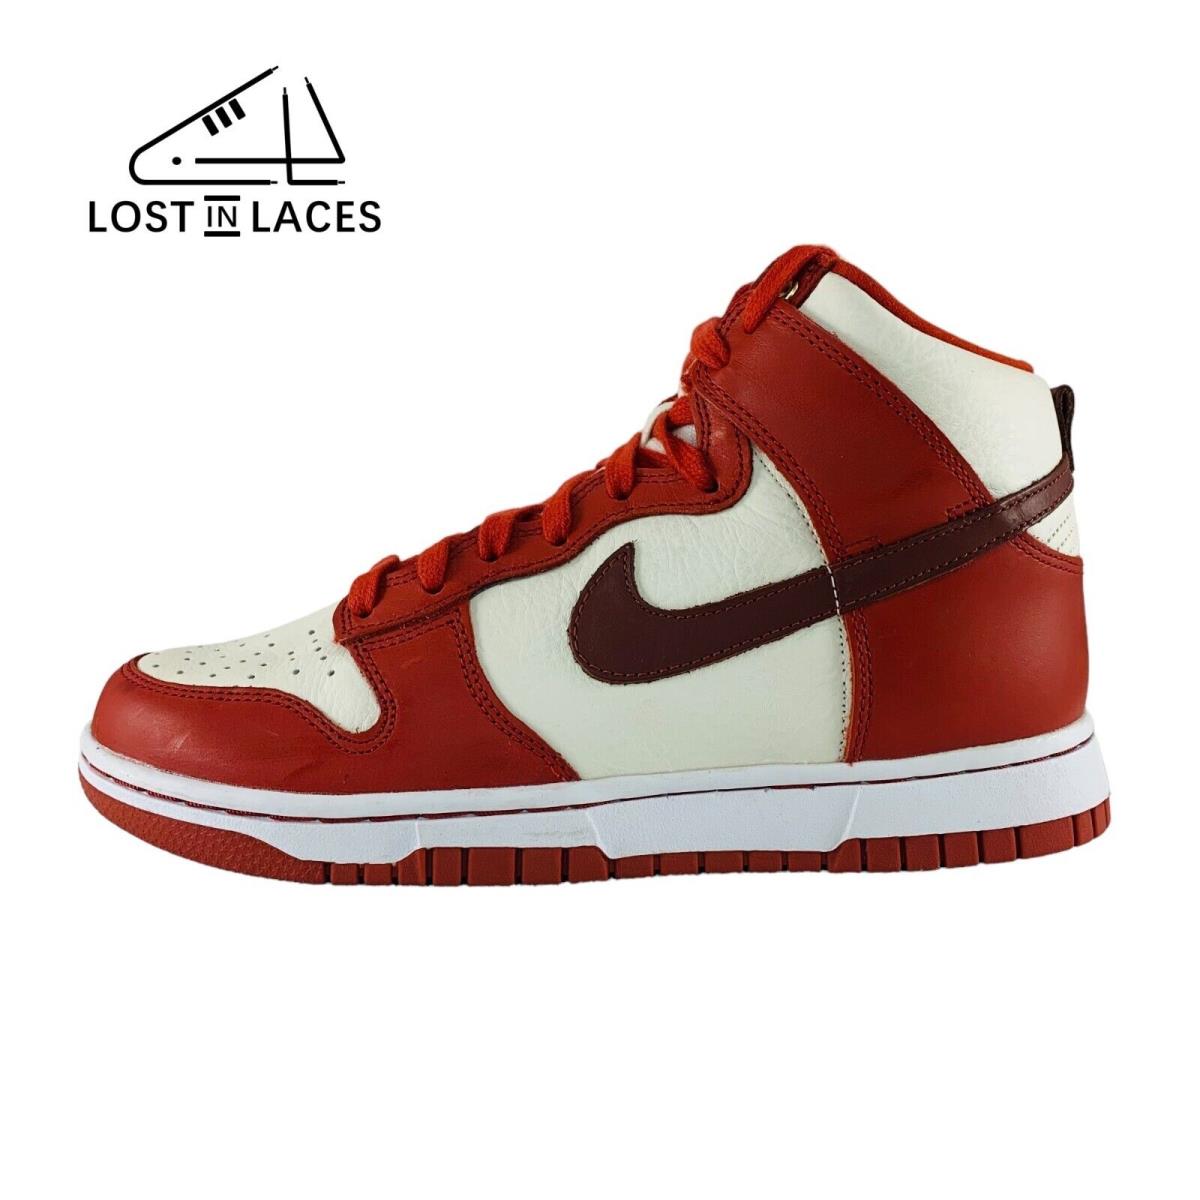 Nike Dunk High Lxx Cinnabar Red White Sneakers Shoes Women`s Sizes